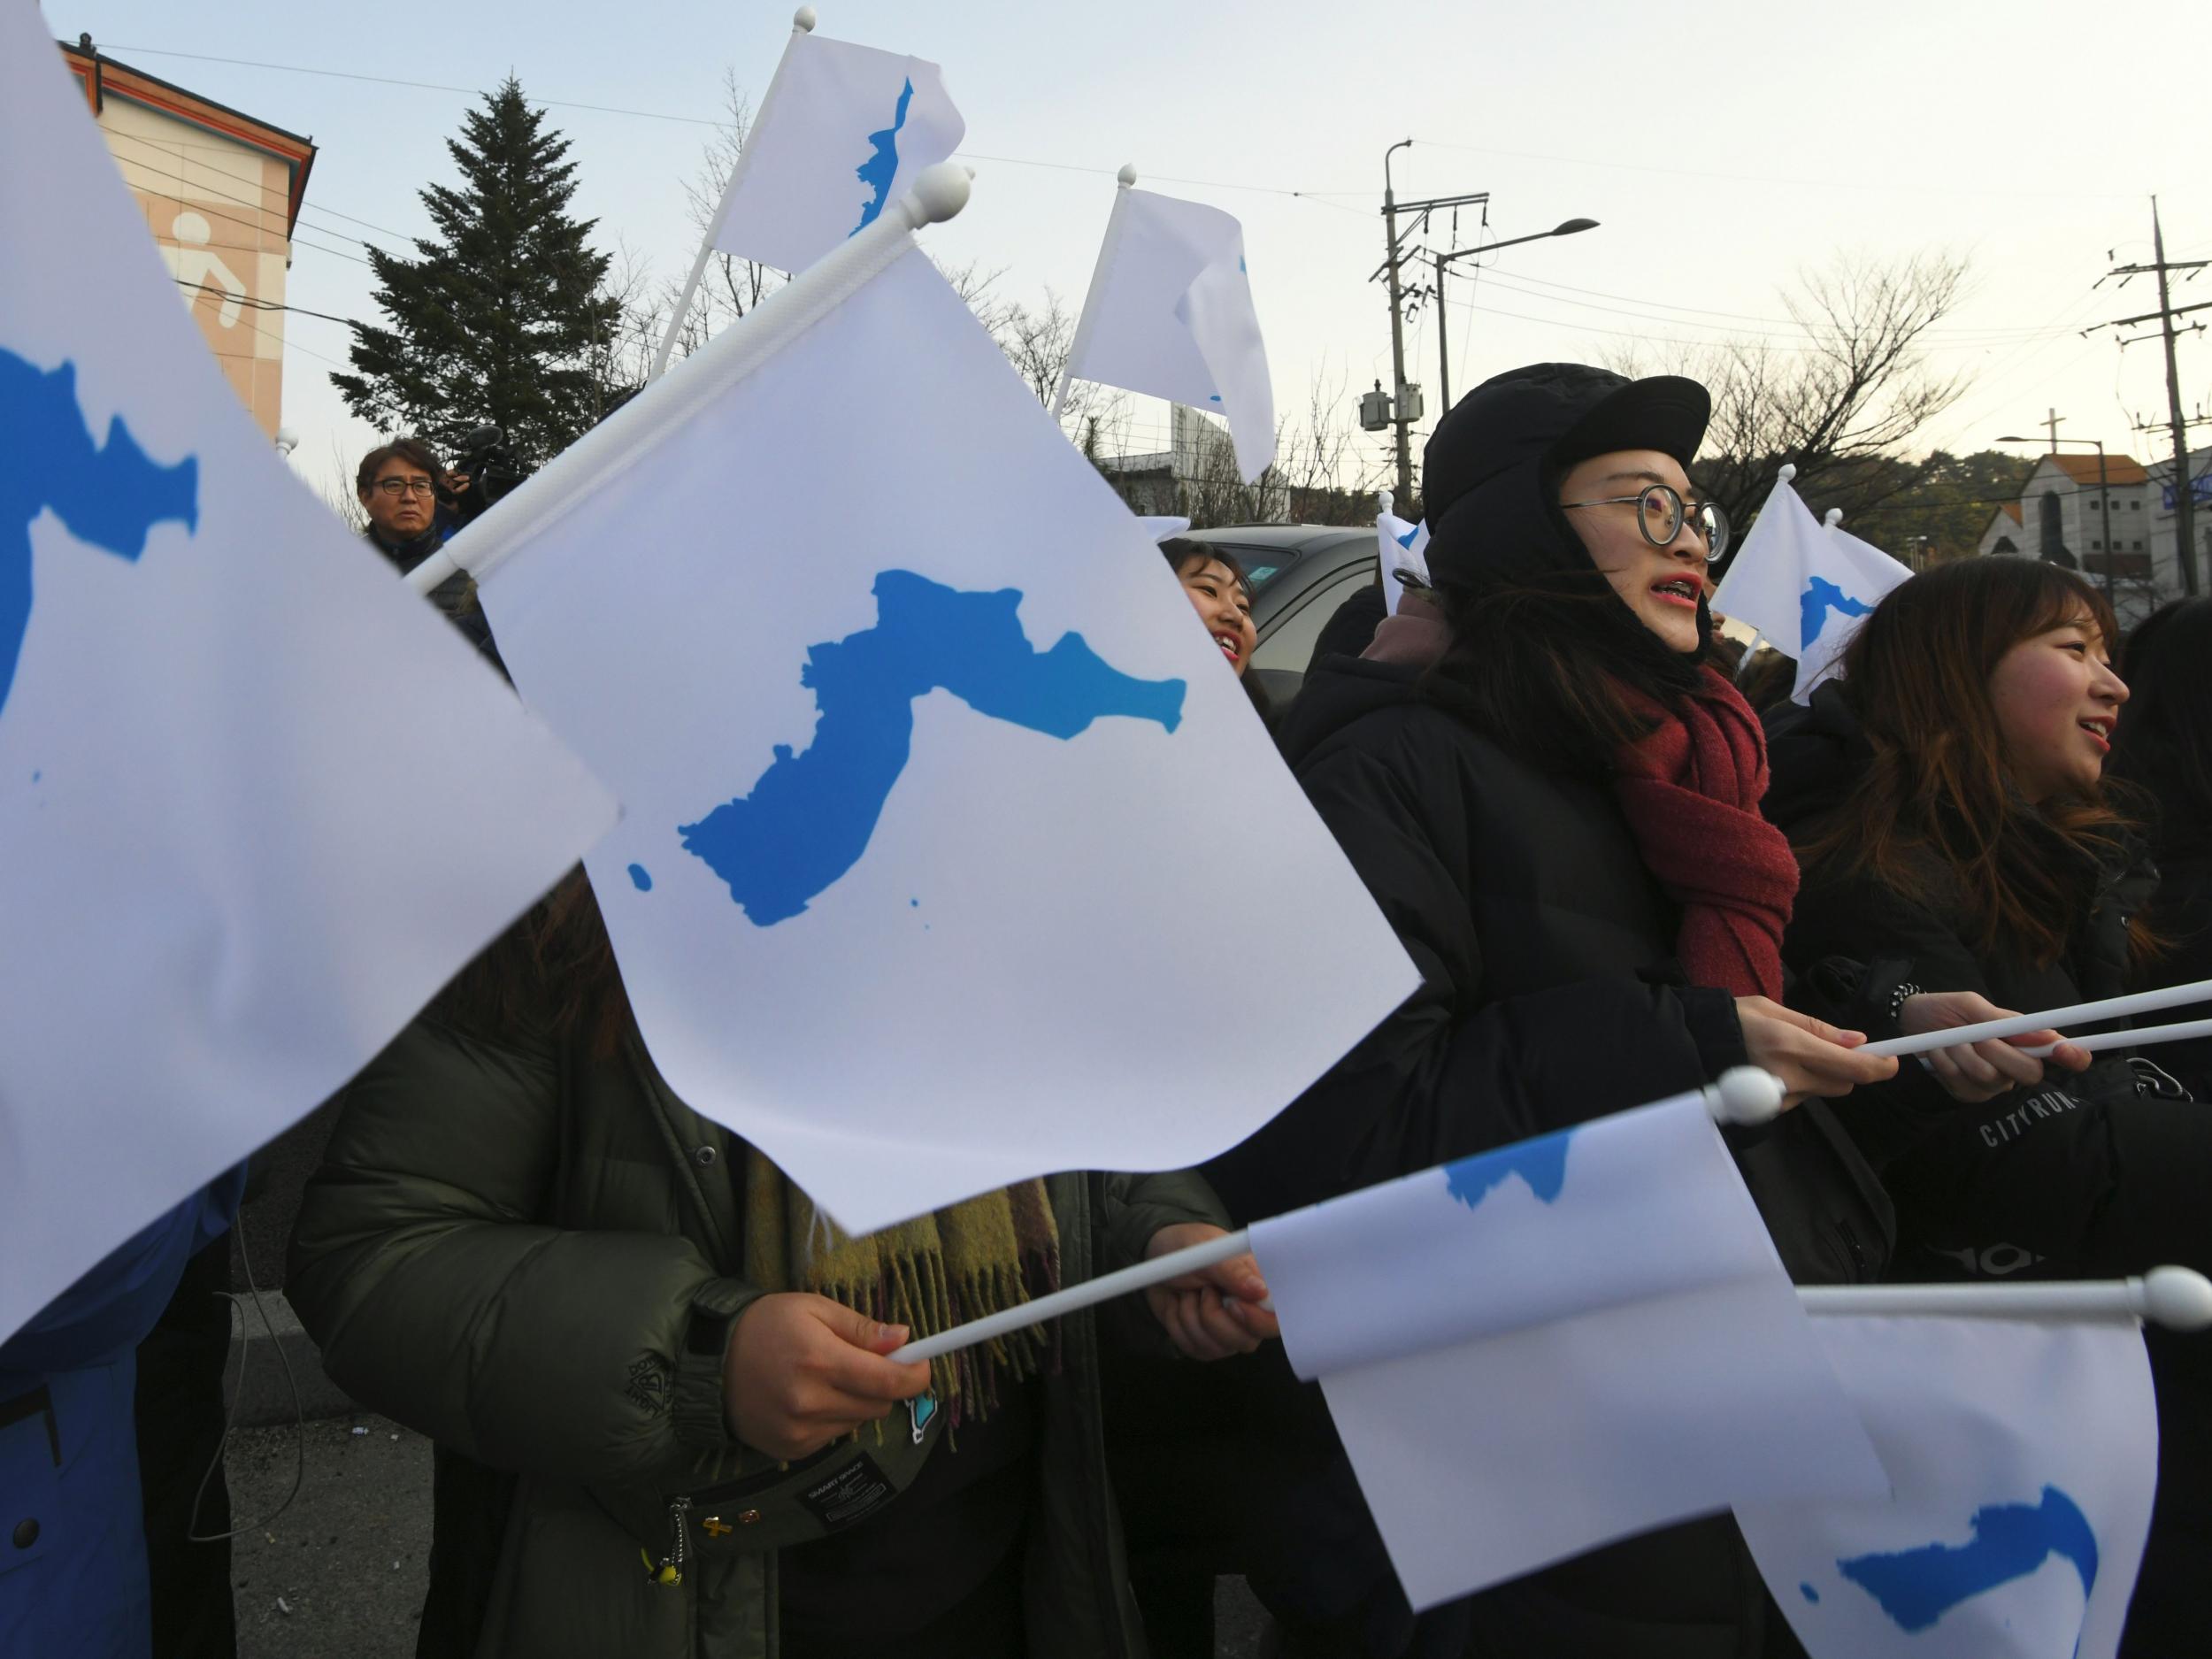 South Korean supporters wave ‘unification flags’ as they welcome North Korea’s art performers to Gangneung, the host city of the ice venues for the Pyeongchang Winter Olympic Games